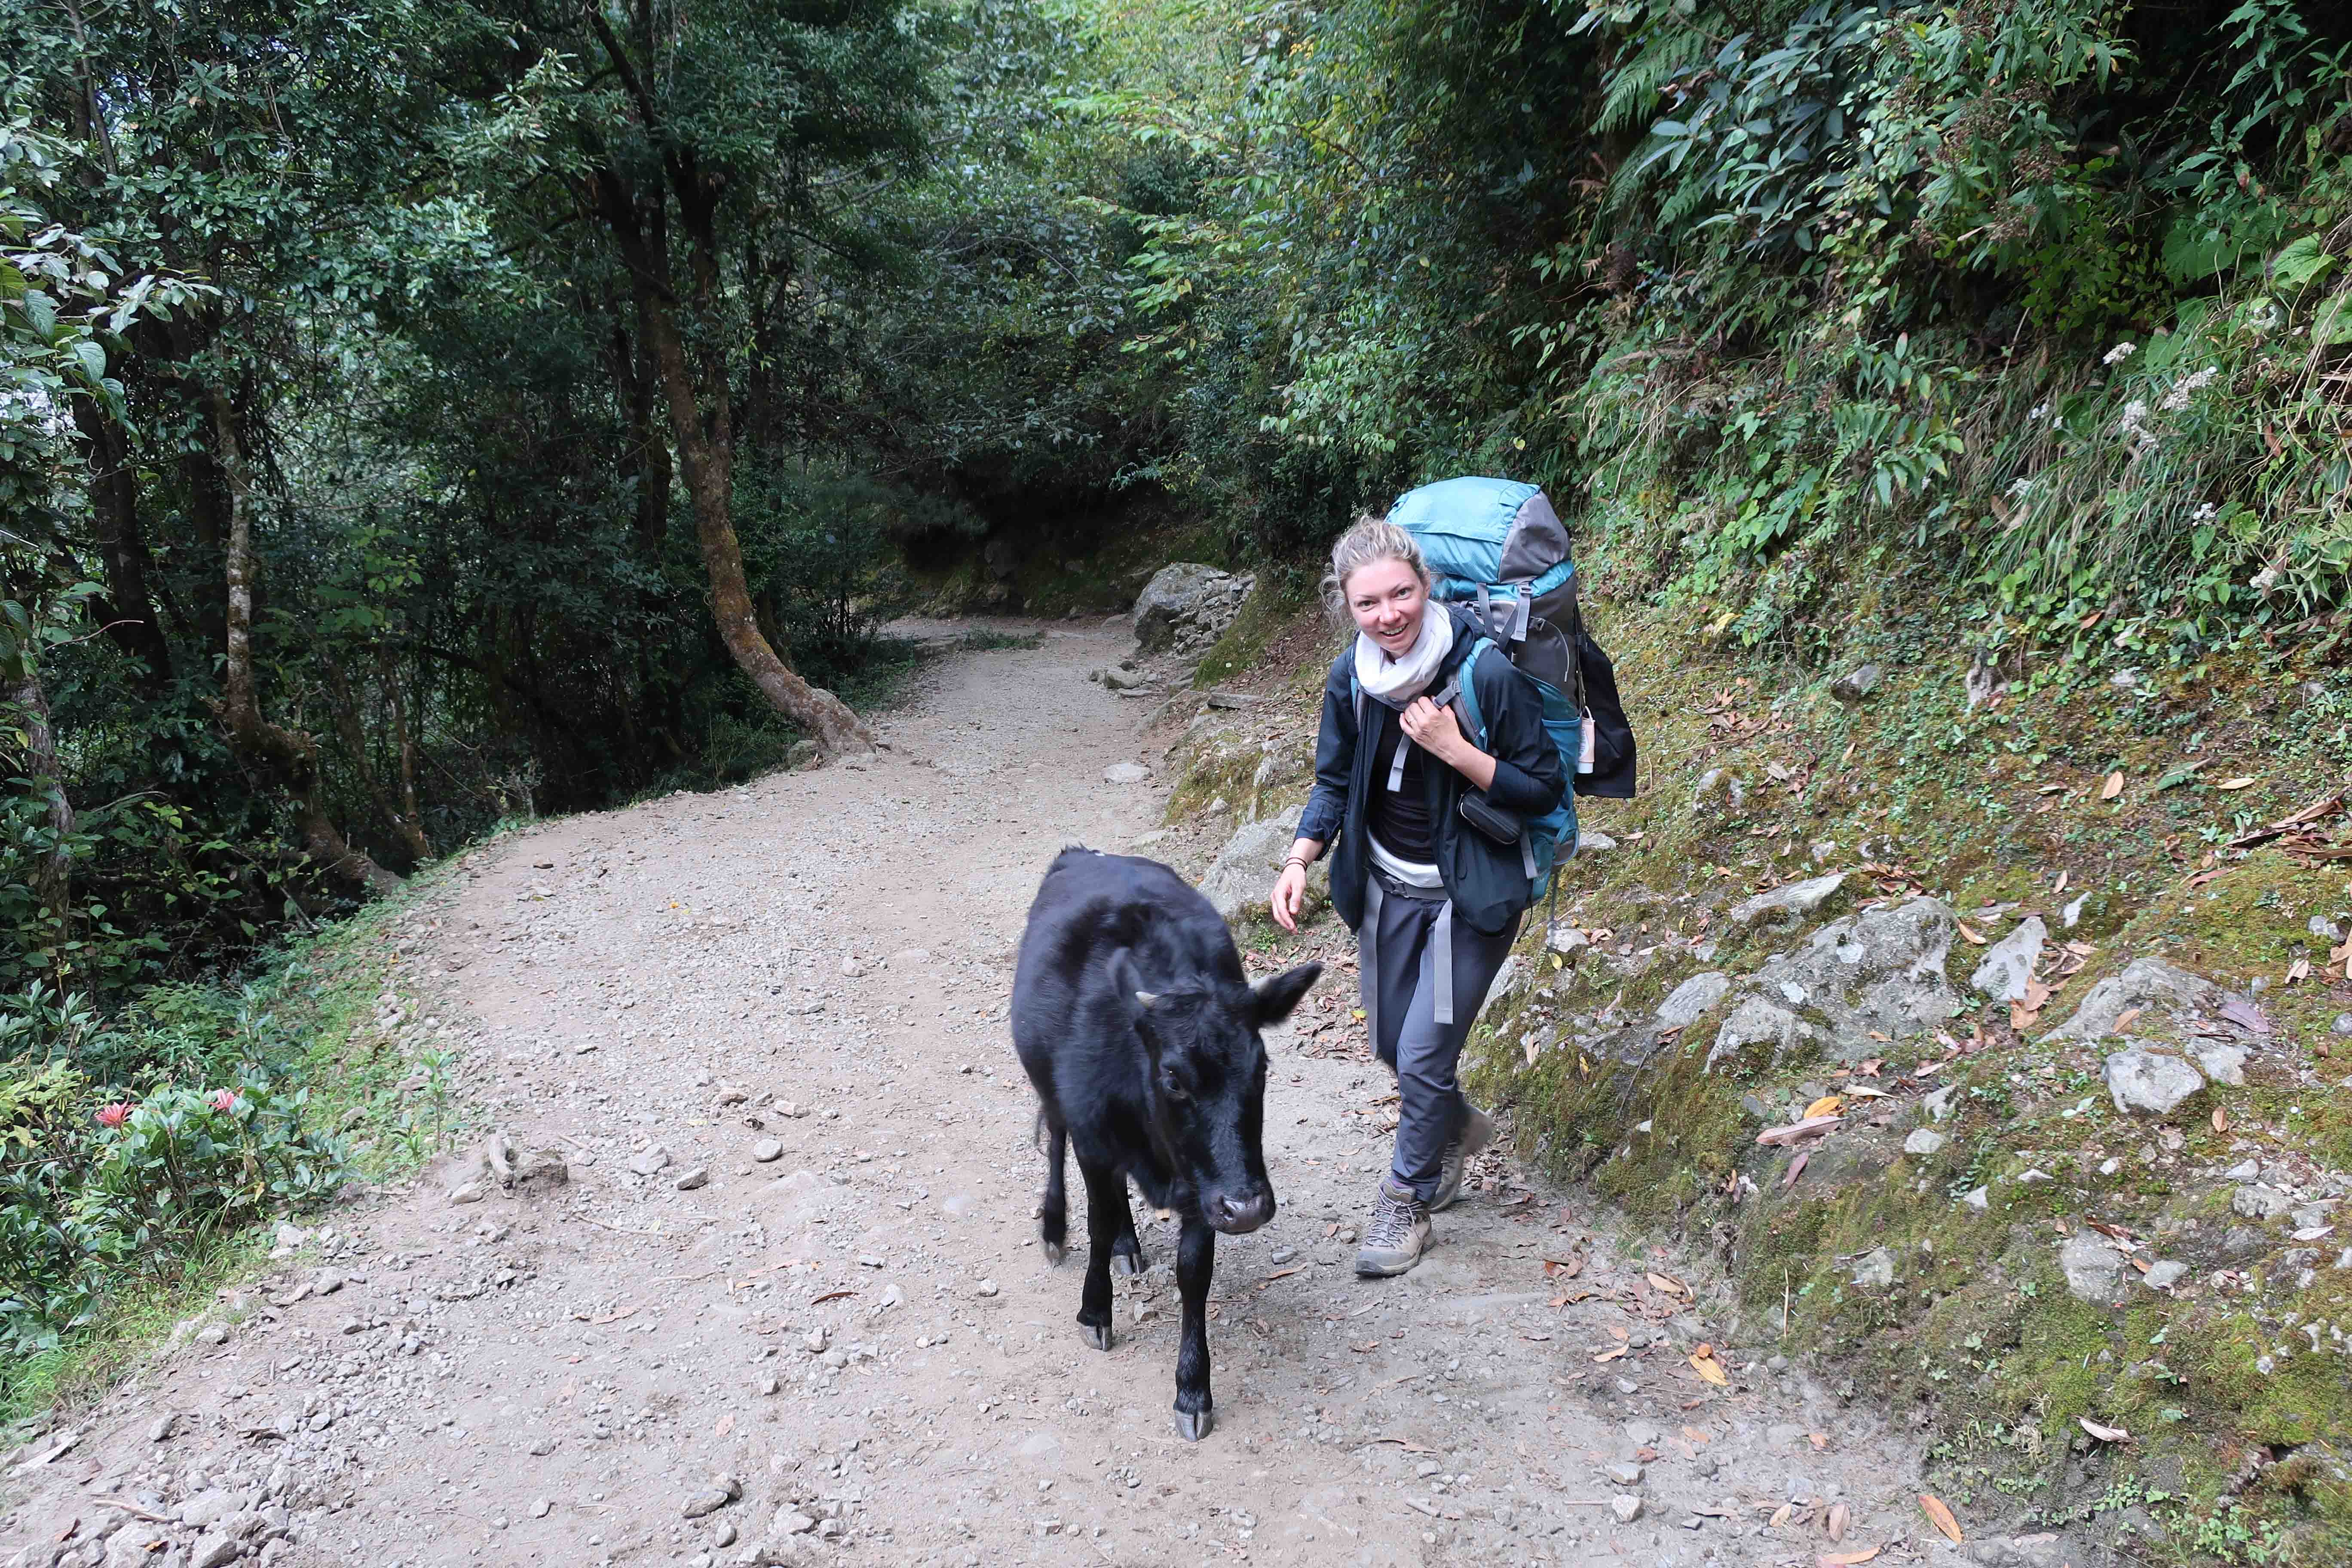 Meeting a bull calf on the way to Lukla